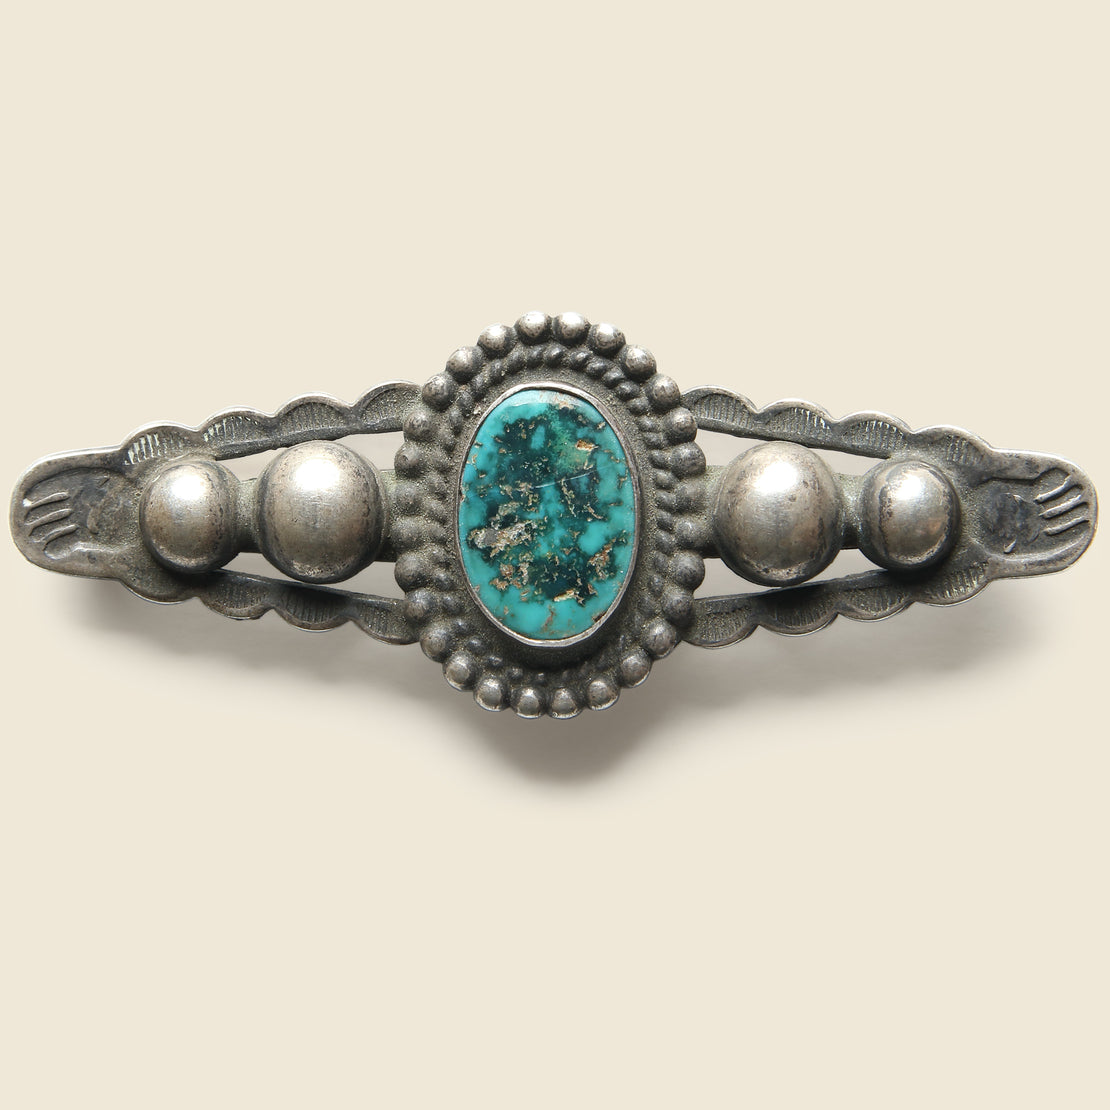 Vintage Turquoise & Silver Pin